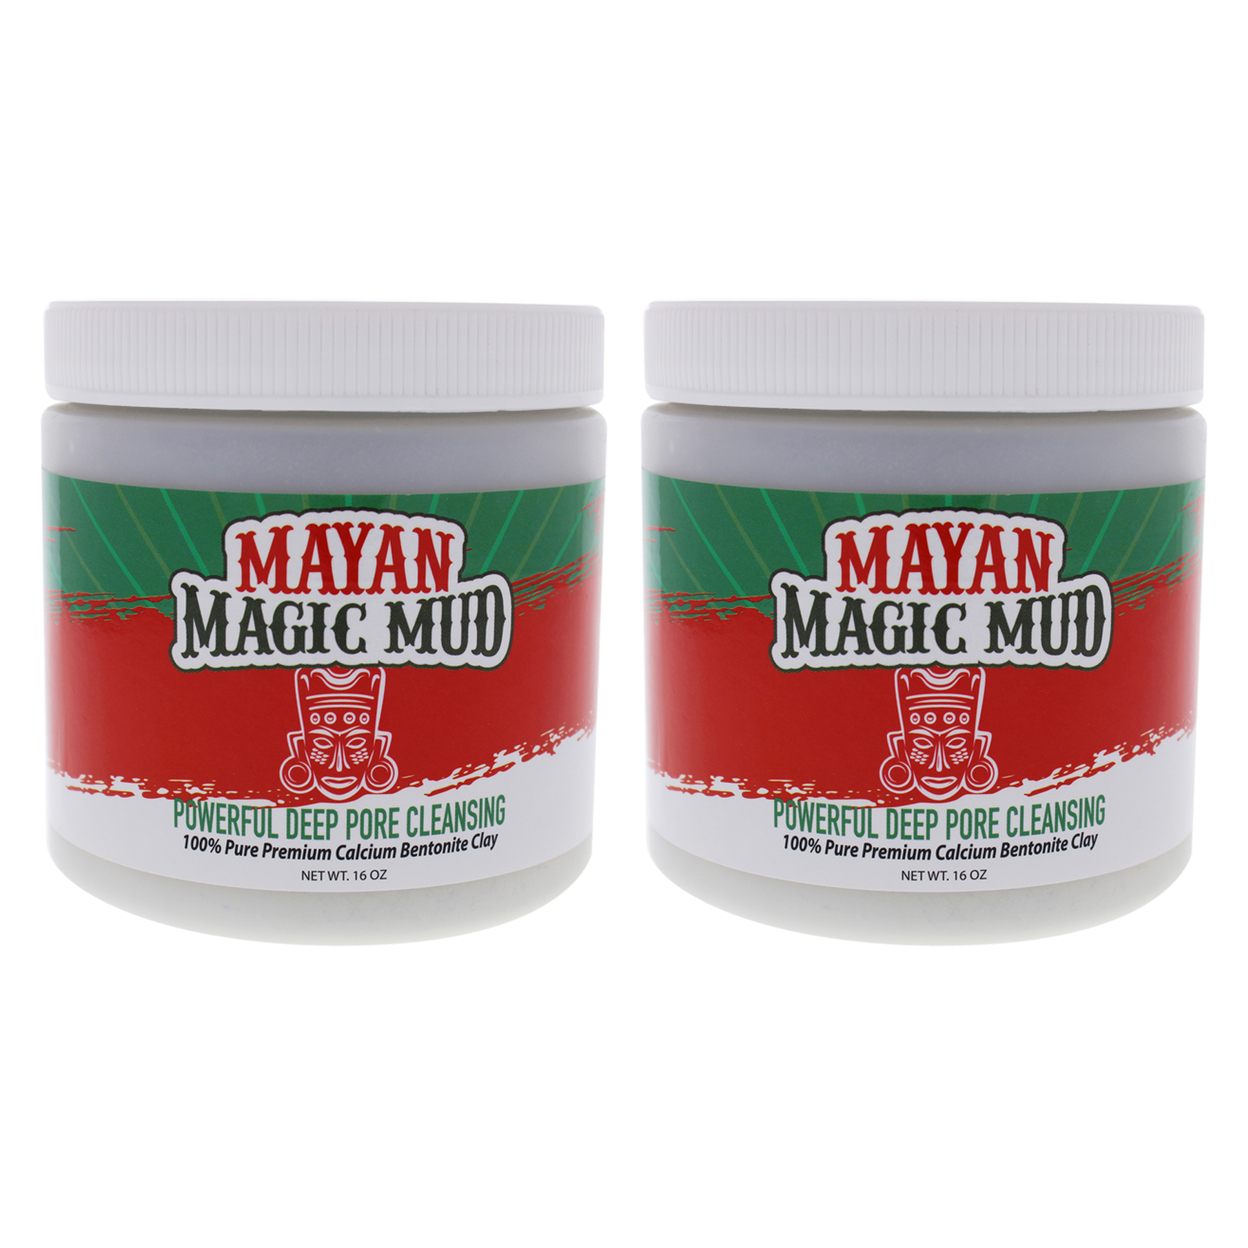 Mayan Magic Mud Powerful Deep Pore Cleansing Clay - Pack Of 2 Cleanser 16 Oz